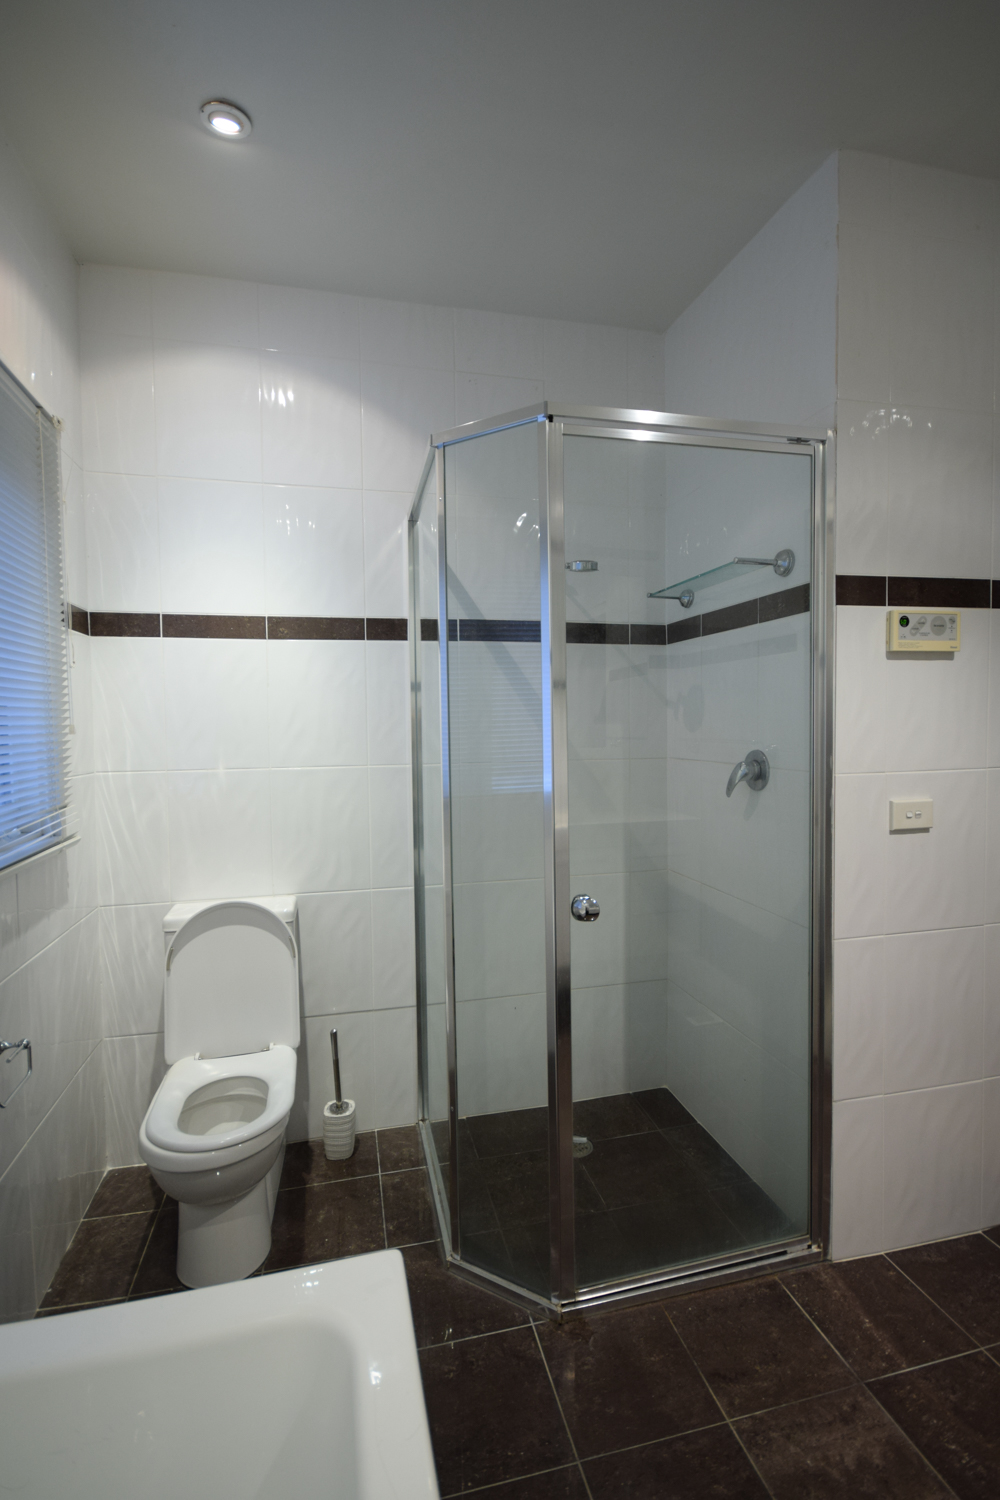 Previous shower and toilet